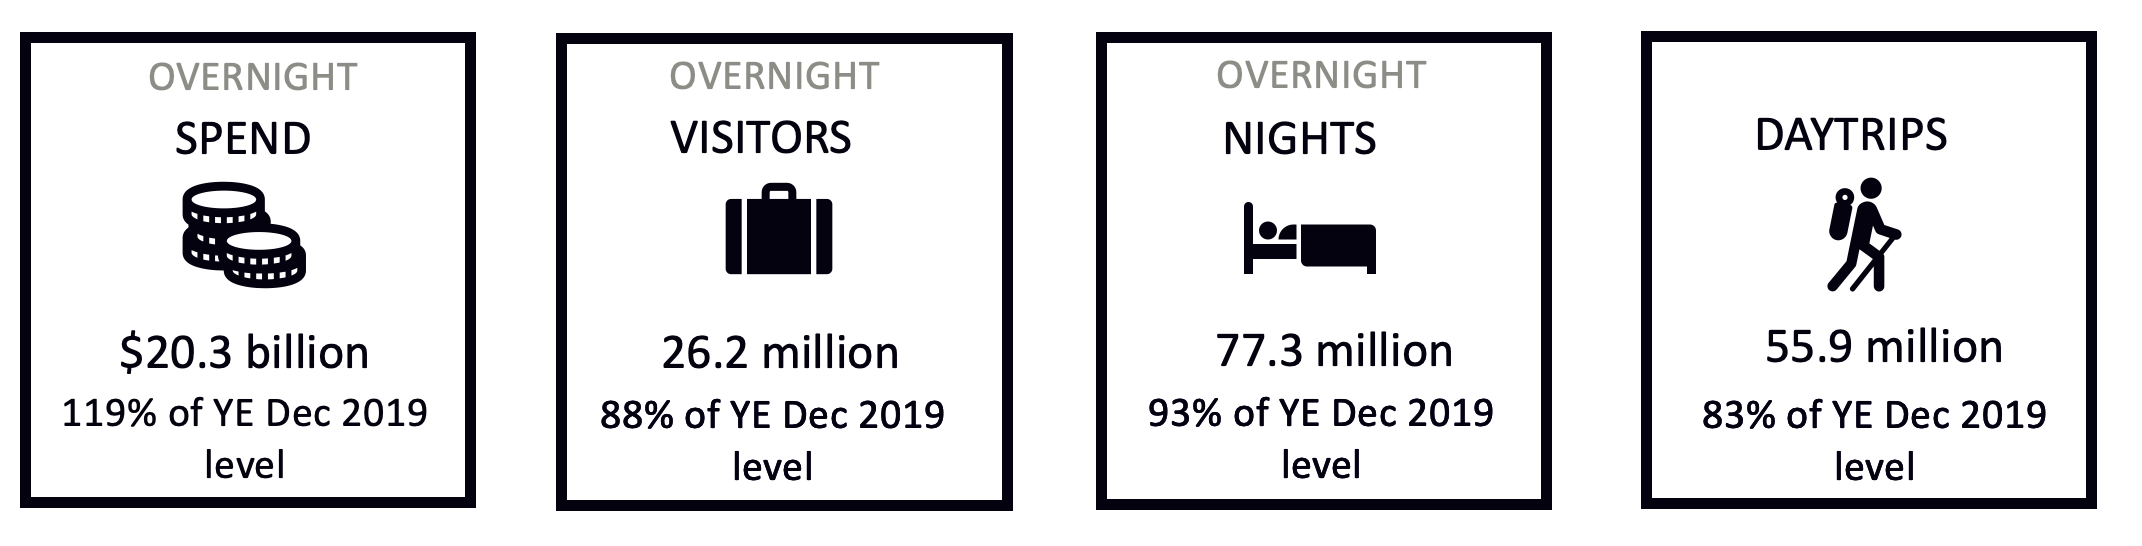 Some top line stats for domestic travel to and within Victoria for the year ending December 2022. Overnight spend $20.3 billion, 119% of the year ending December 2019 level. Overnight visitors 26.2 million, 88% of the year ending December 2019 level. Nights 77.3 million, 93% of the year ending December 2019 level. Daytrips 55.9 million, 83% of the year ending December 2019 level.